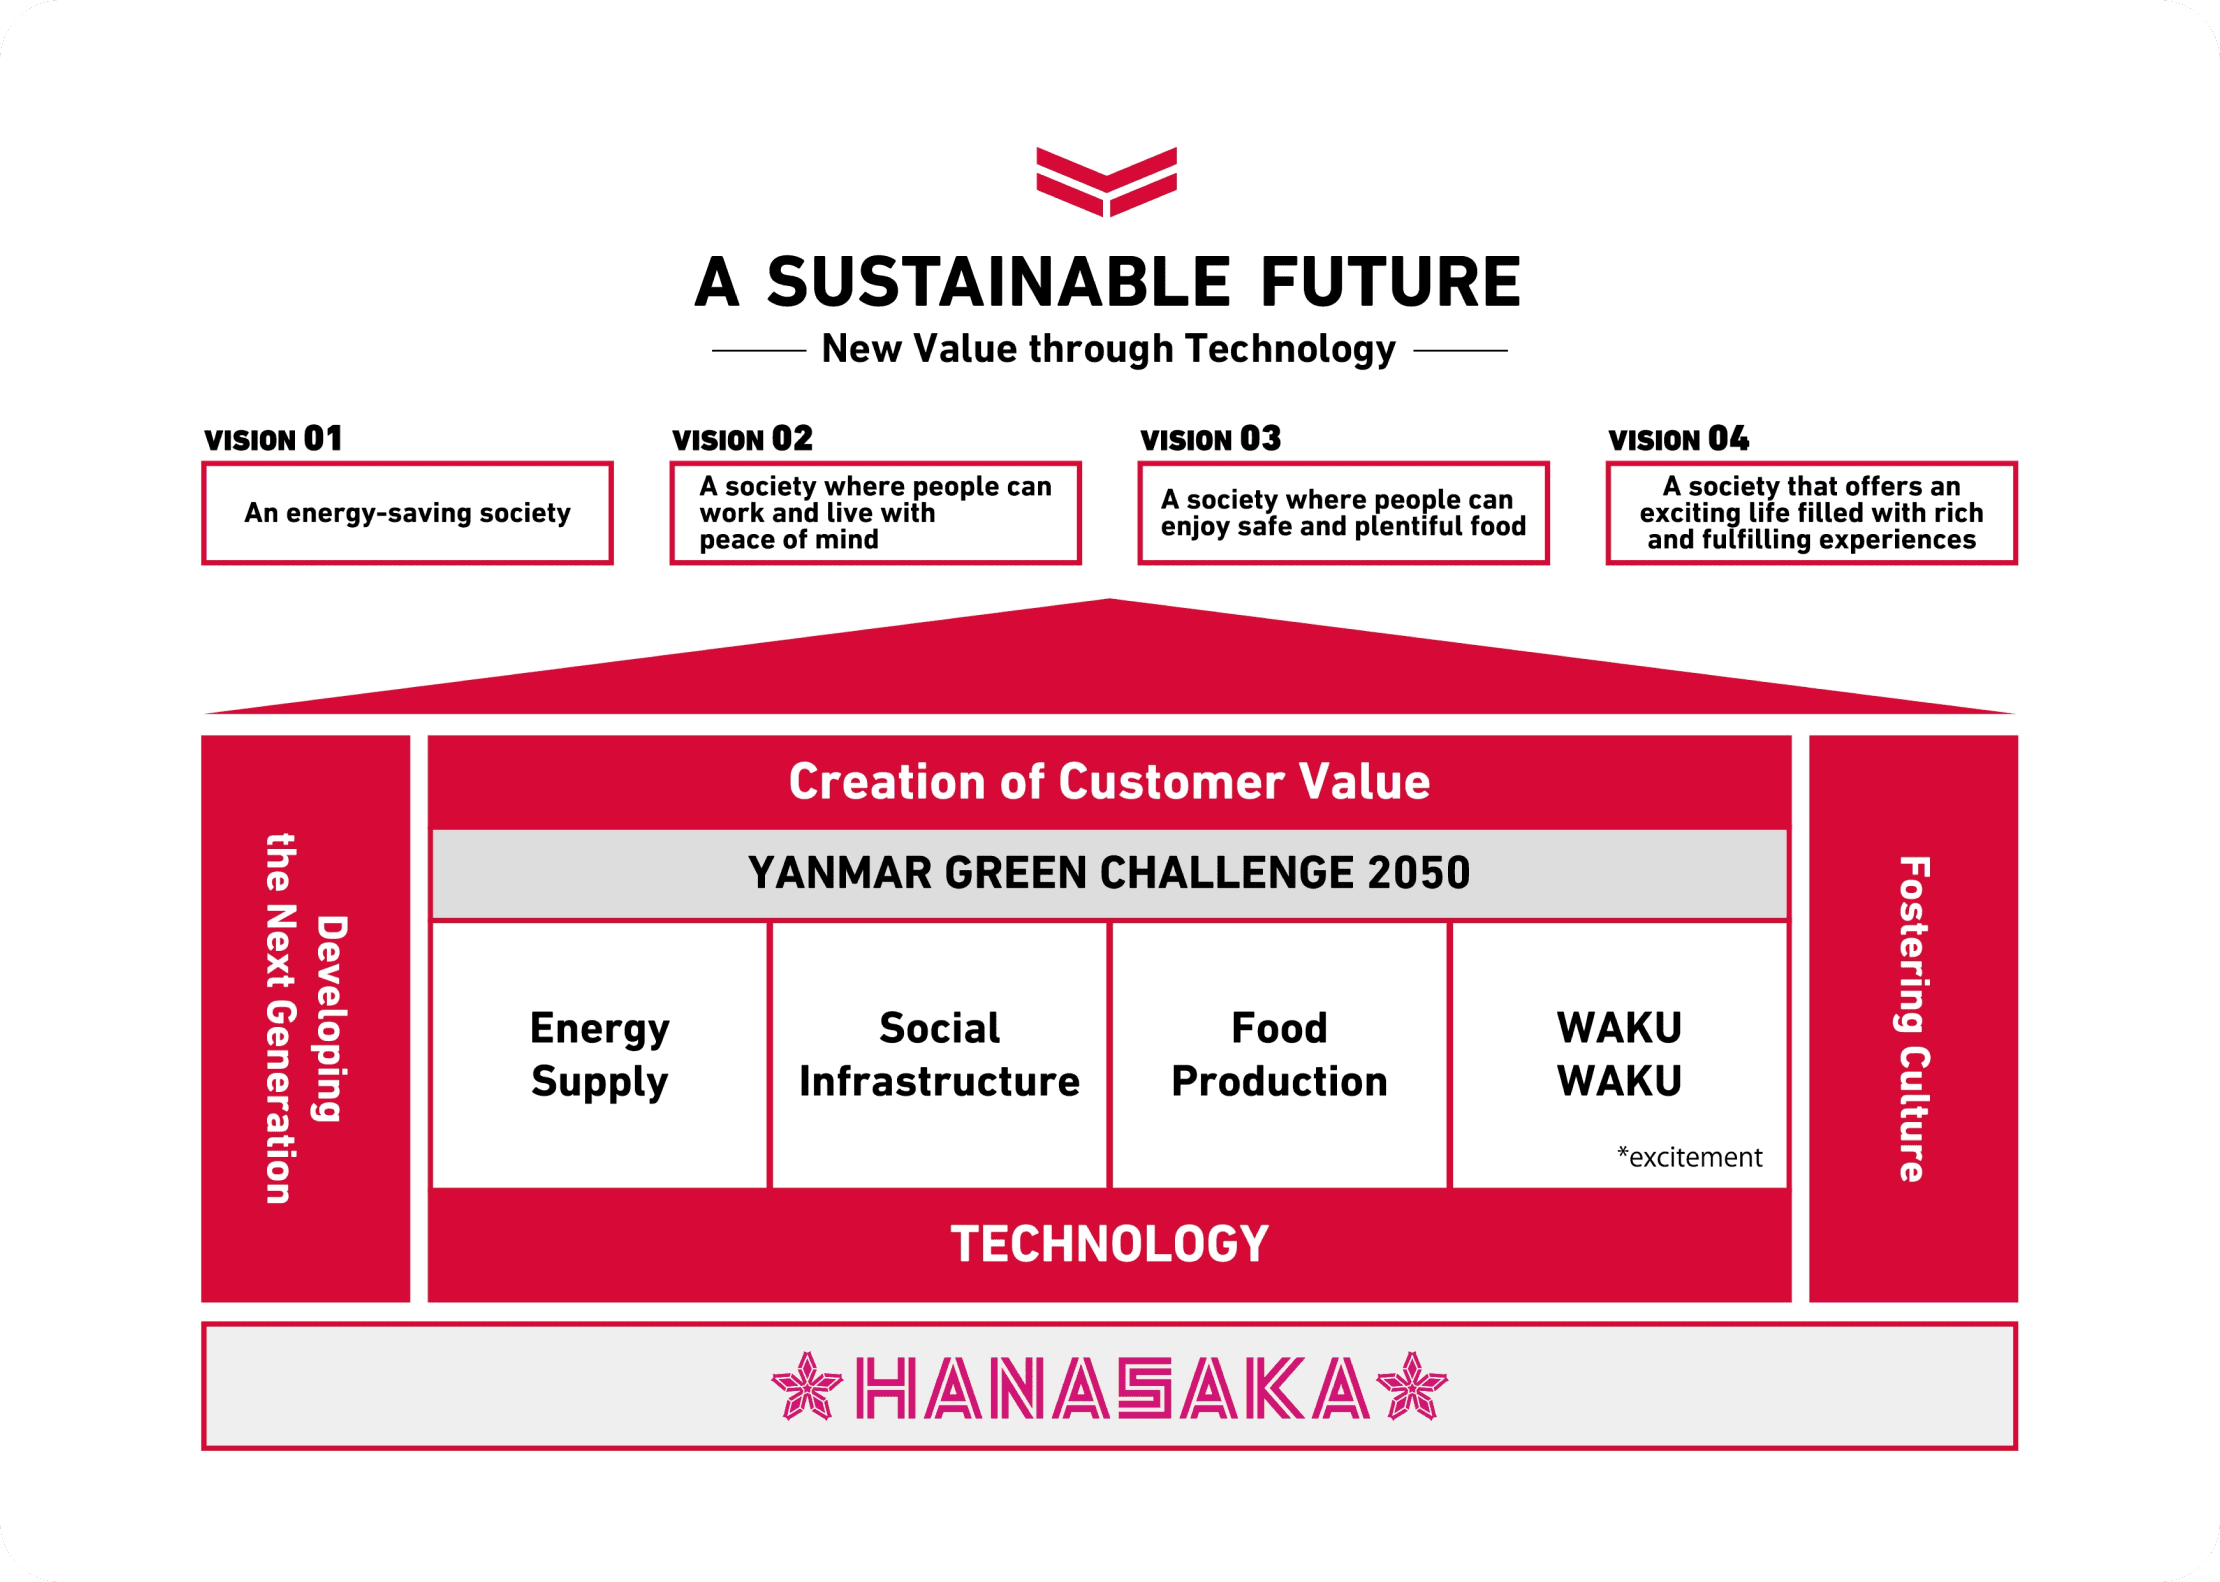 The diagram shows each business activity, the four societies in the FUTURE VISION and A SUSTAINABLE FUTURE built up in sequence on the foundation of HANASAKA.